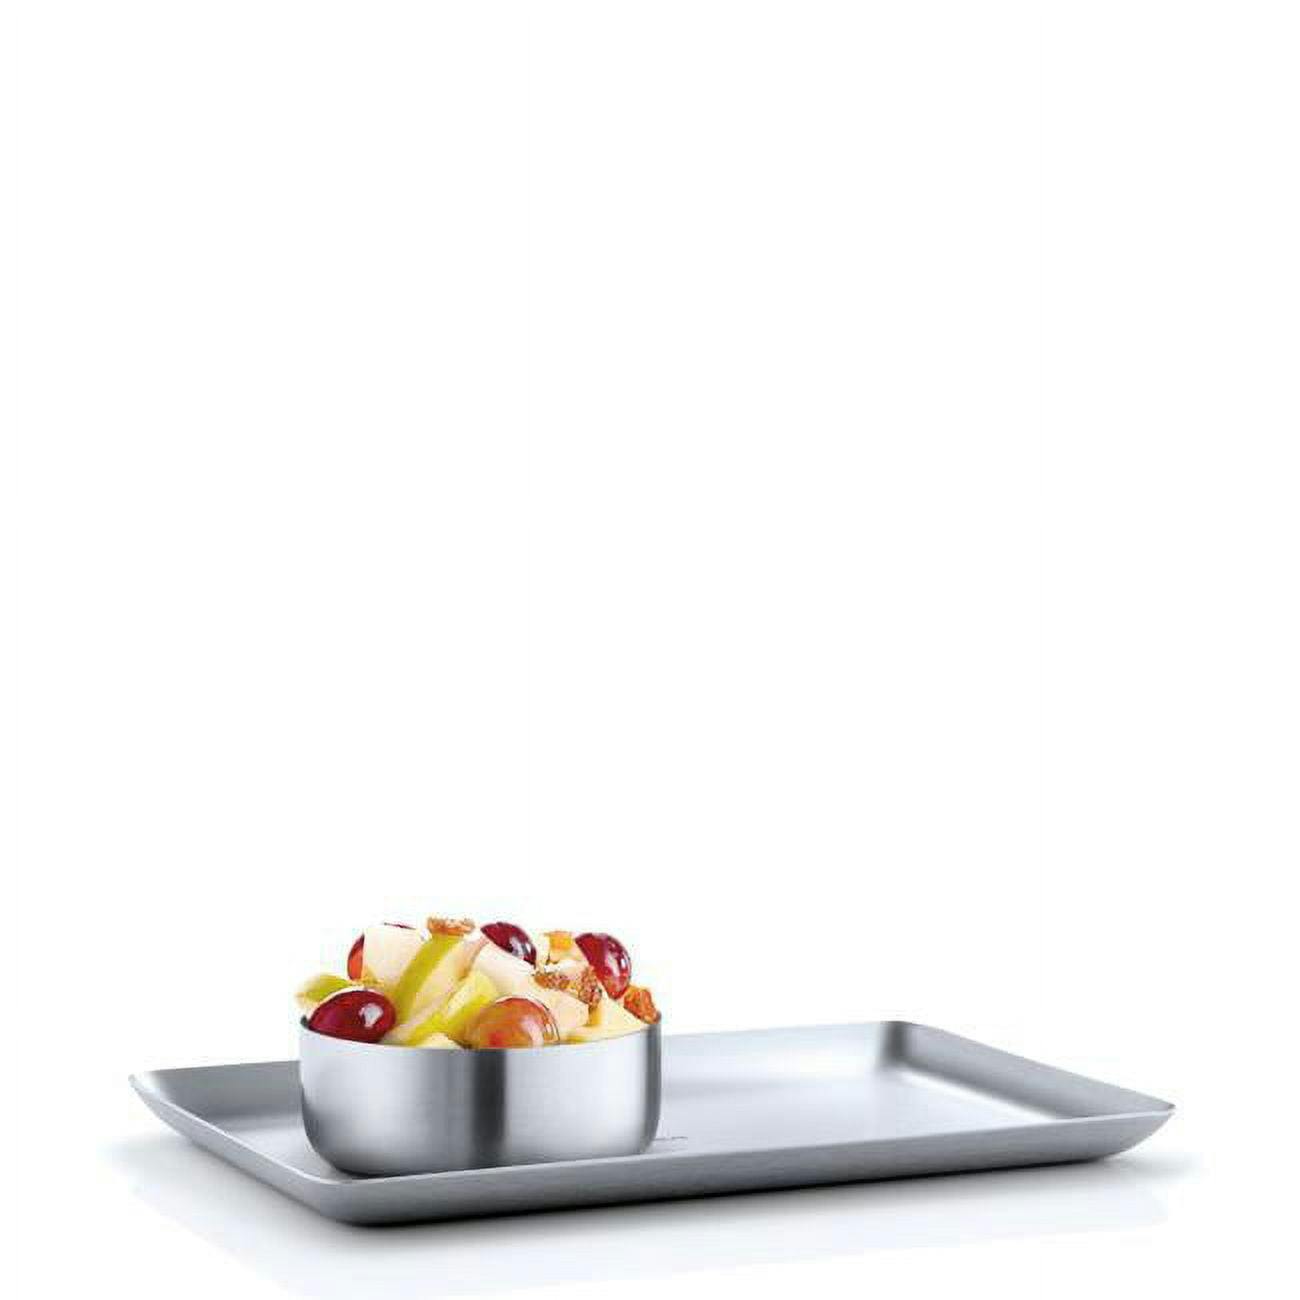 Elegance in Simplicity 15x25cm Matte Stainless Steel Serving Tray